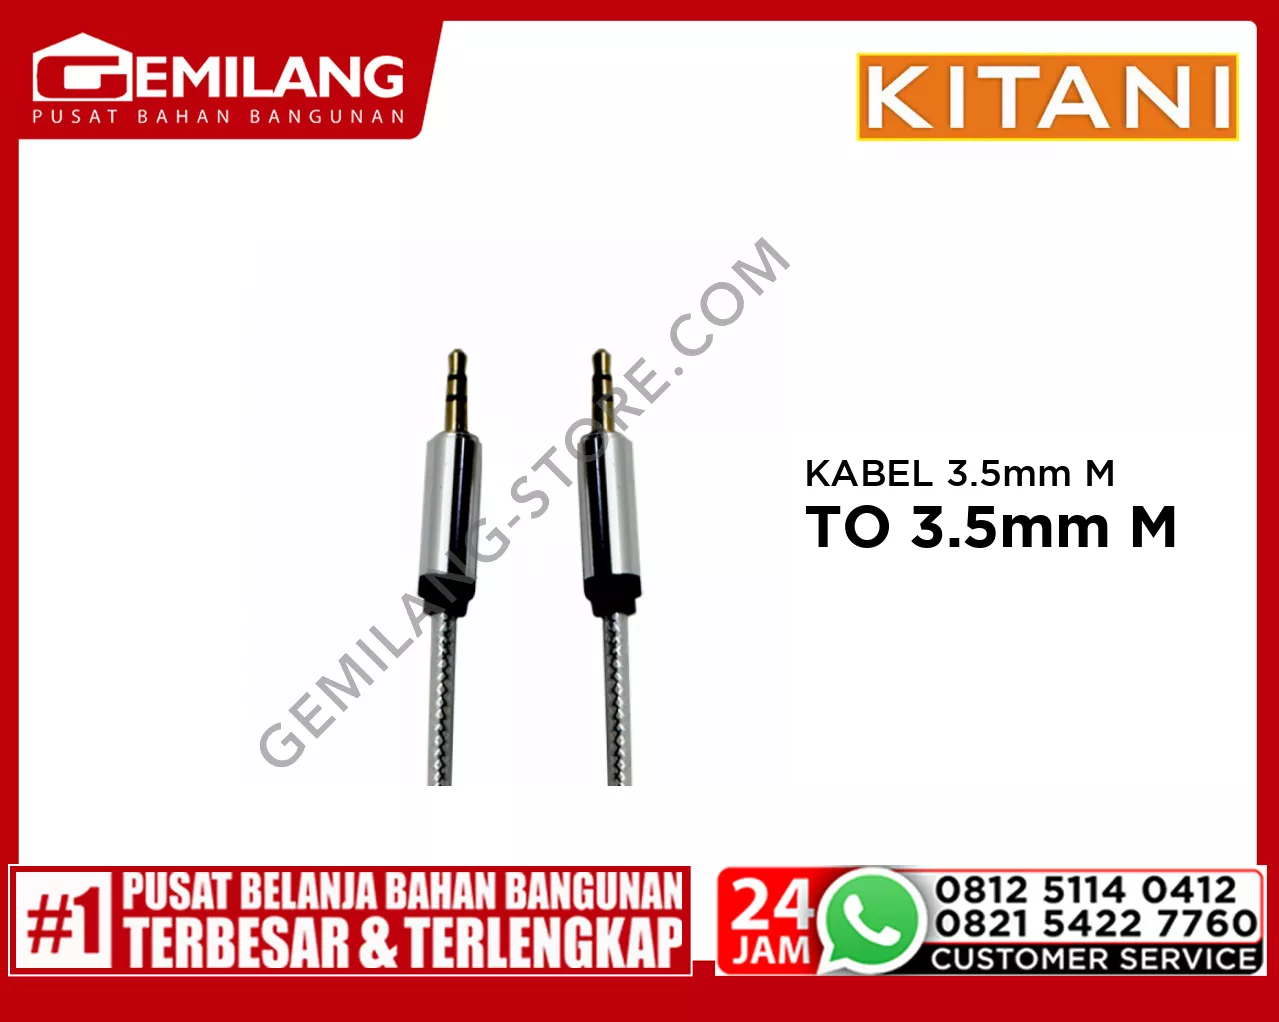 KITANI KABEL 3.5mm MALE STEREO TO 3.5mm MALE STRREO GOLD KECIL